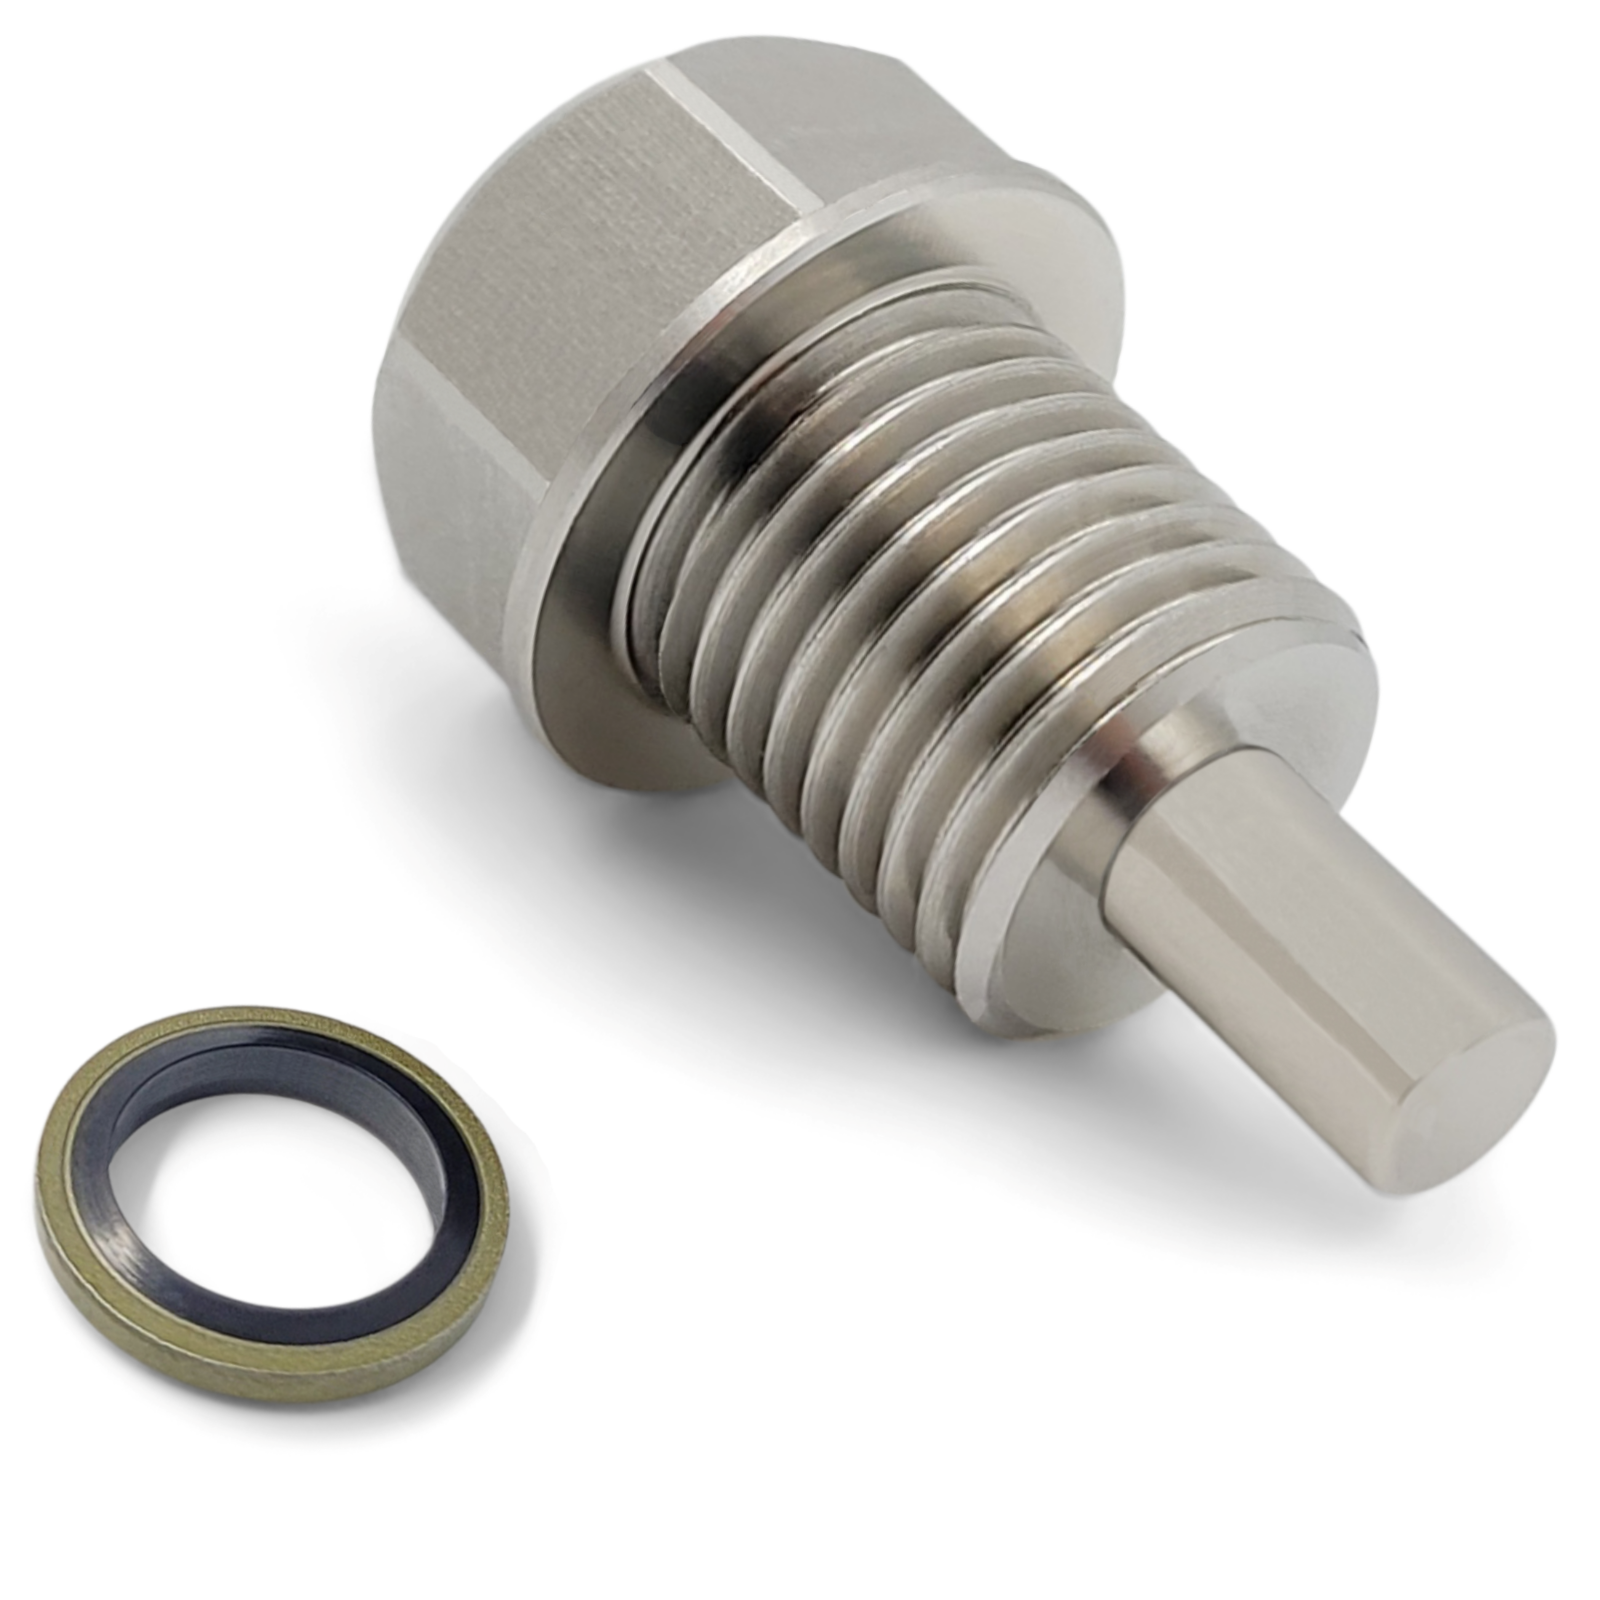 Magnetic Oil Drain Plug - Compatible with JEEP Engine - Made of Stainless Steel - $14.10